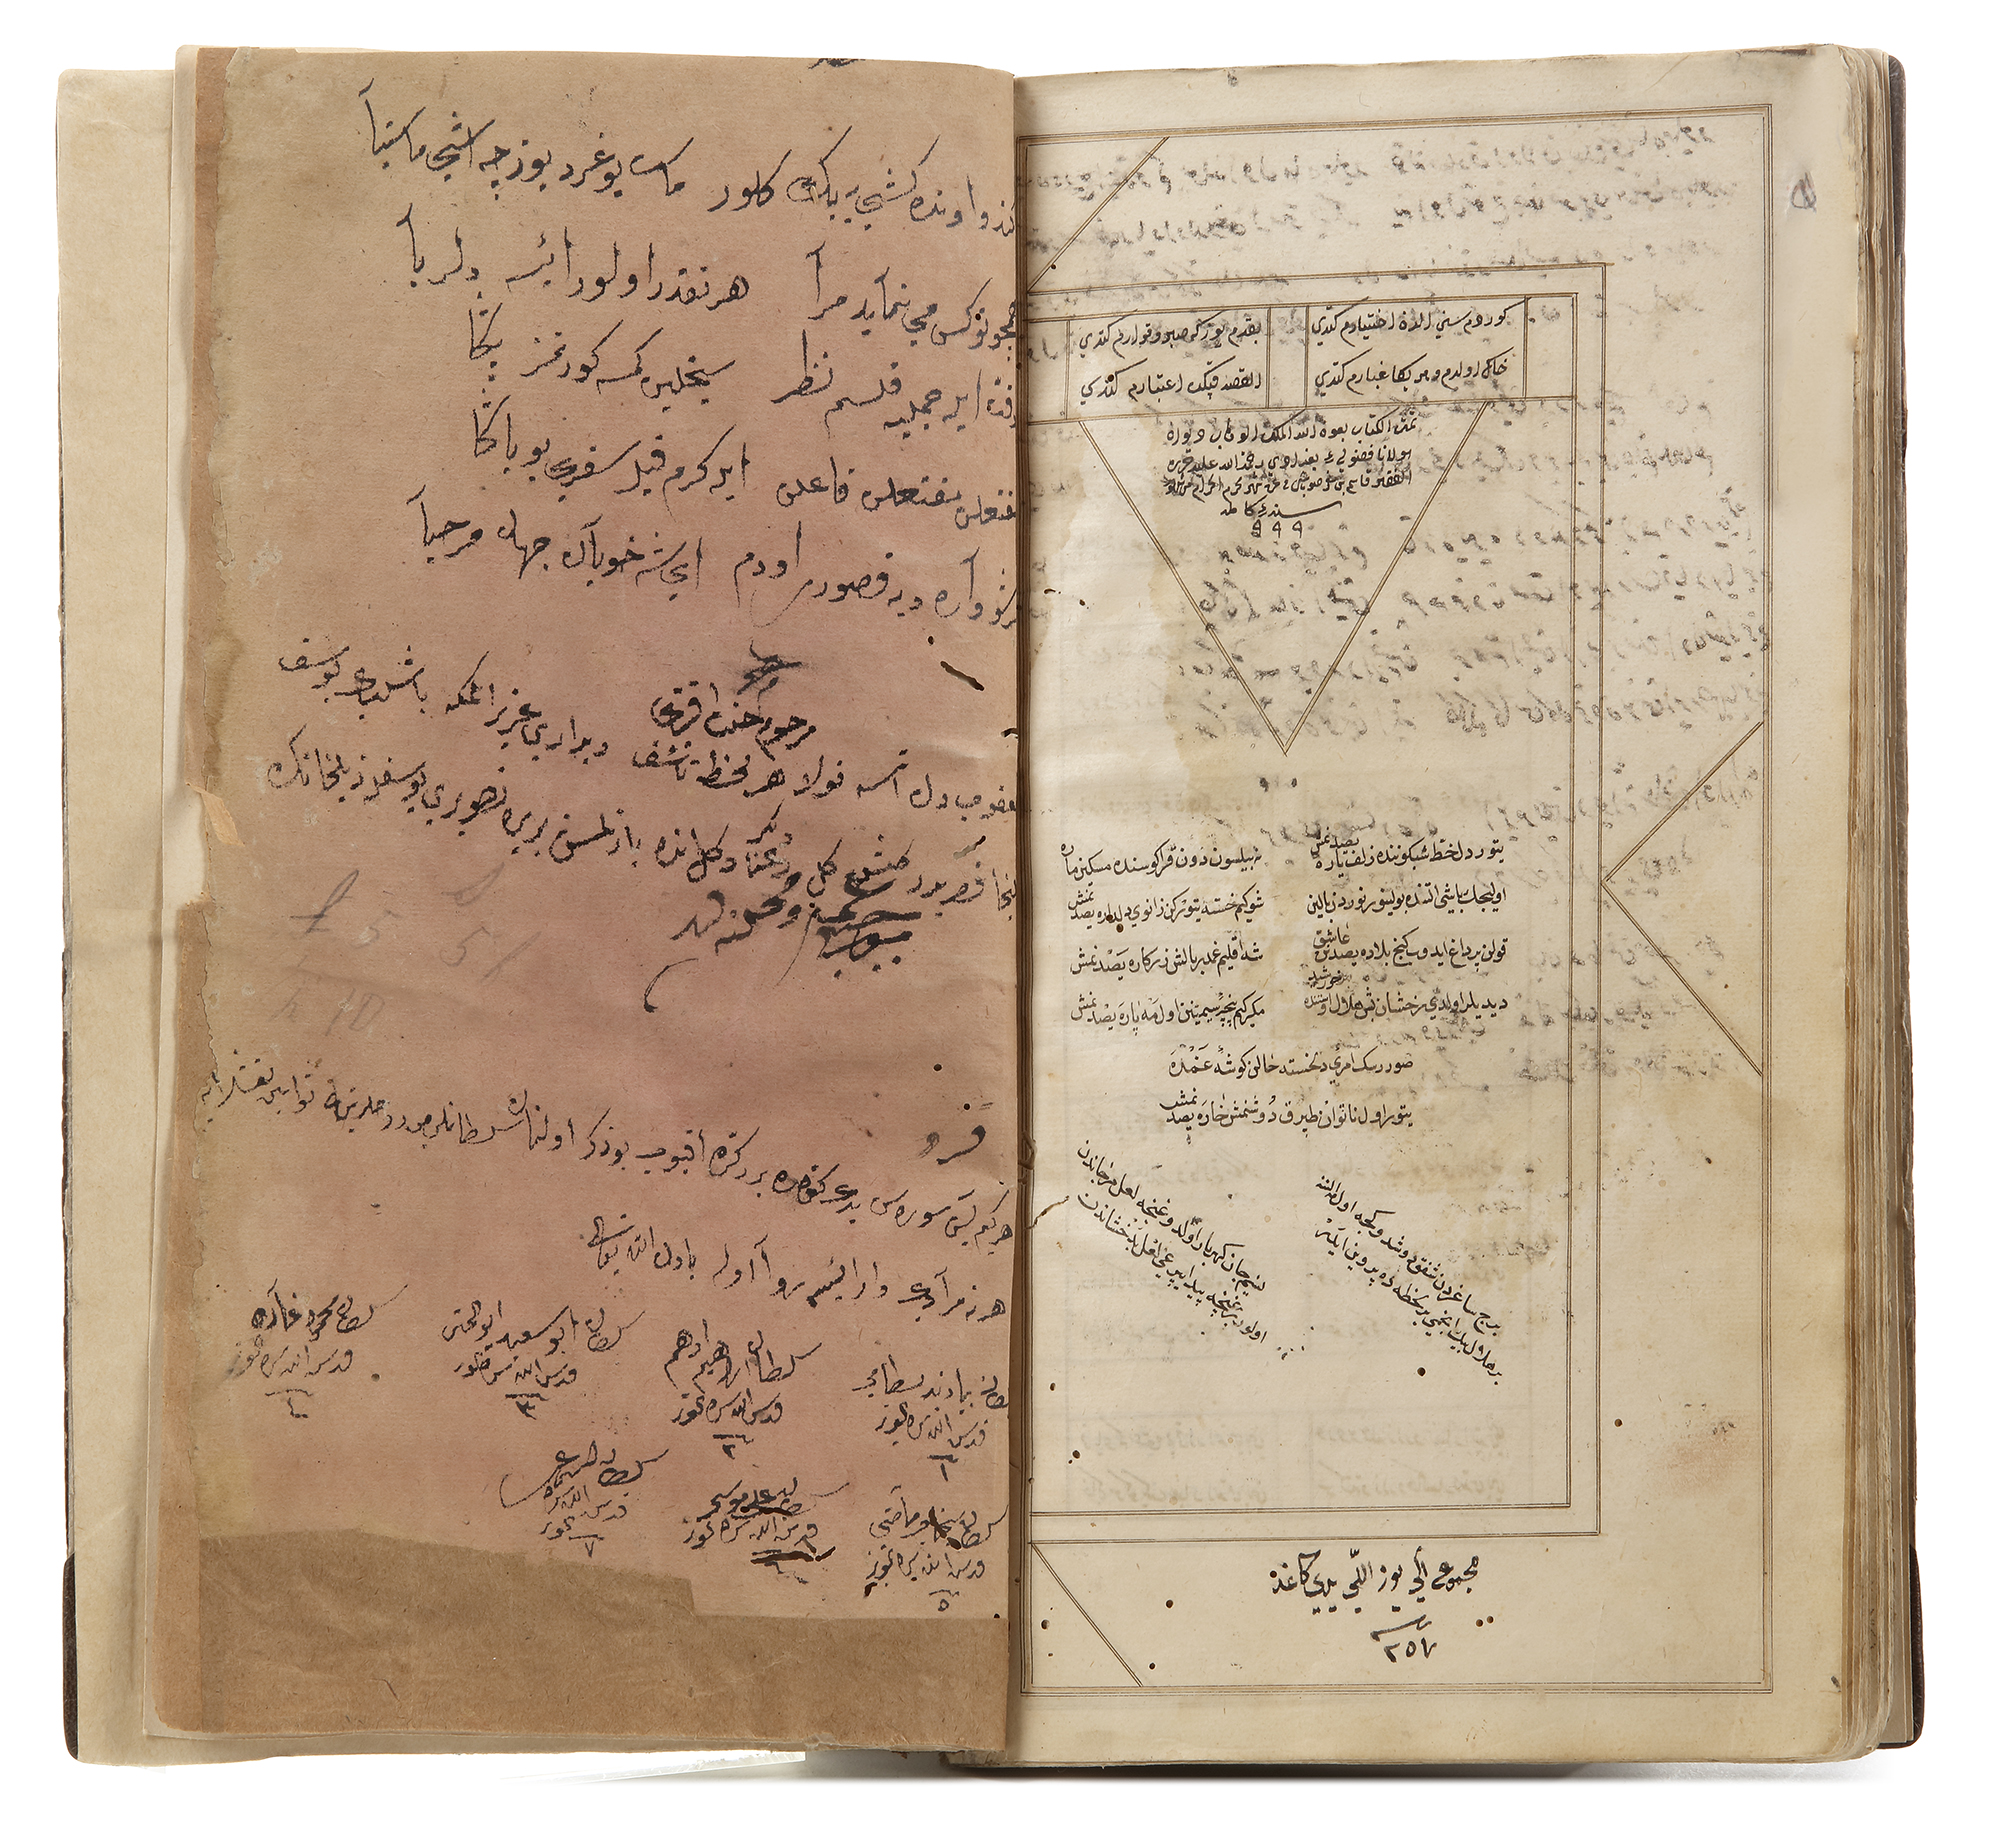 AN OTTOMAN TURKISH POETRY COLLECTION BY FAZULI BAGHDADI, 999 AH/1591 AD, COPIED AND DATED BY QASIM S - Image 2 of 3